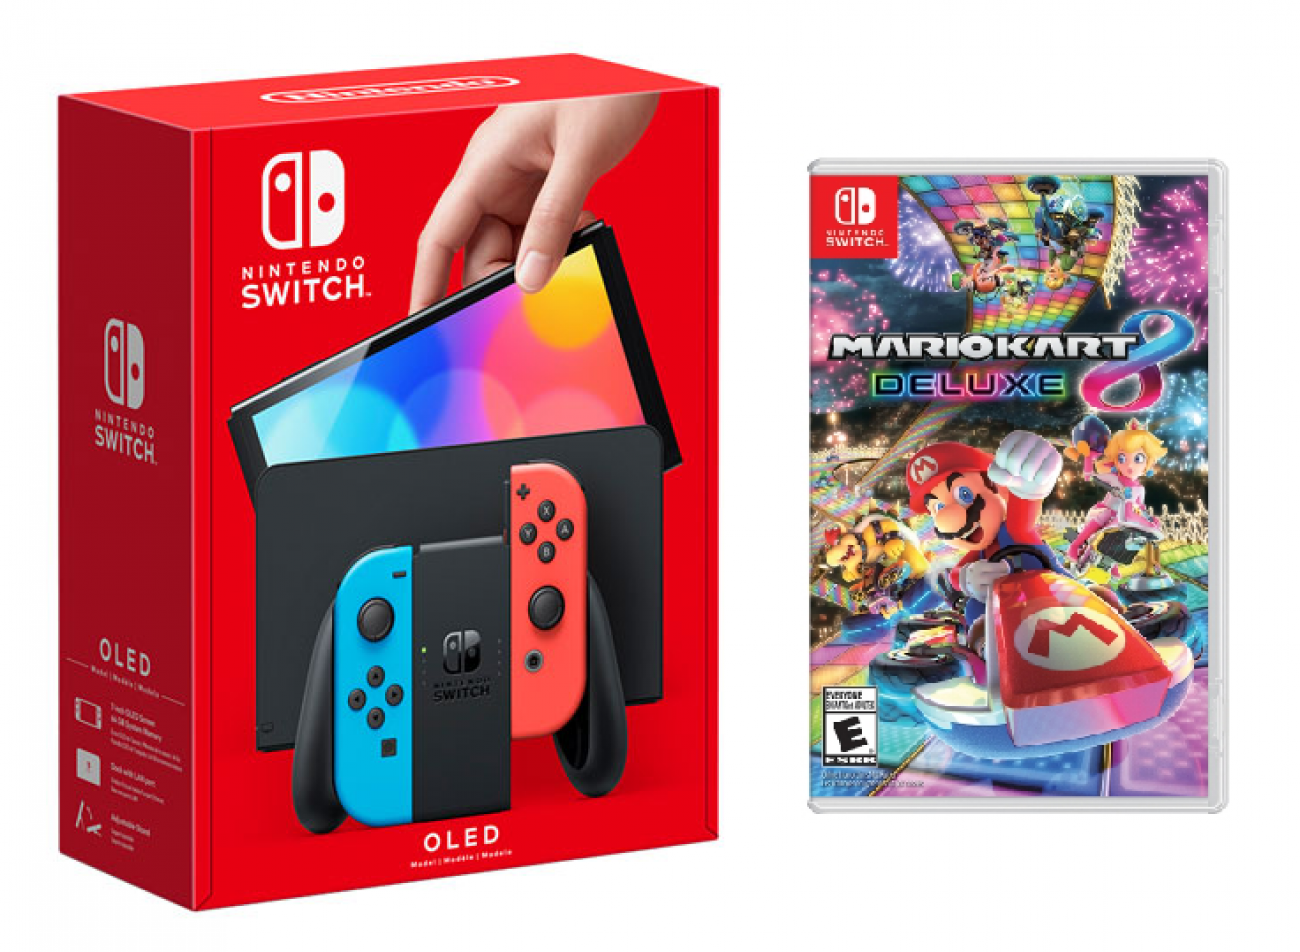 Nintendo Switch  - Neon Red/Blue with Mario Cart 8 Deluxe